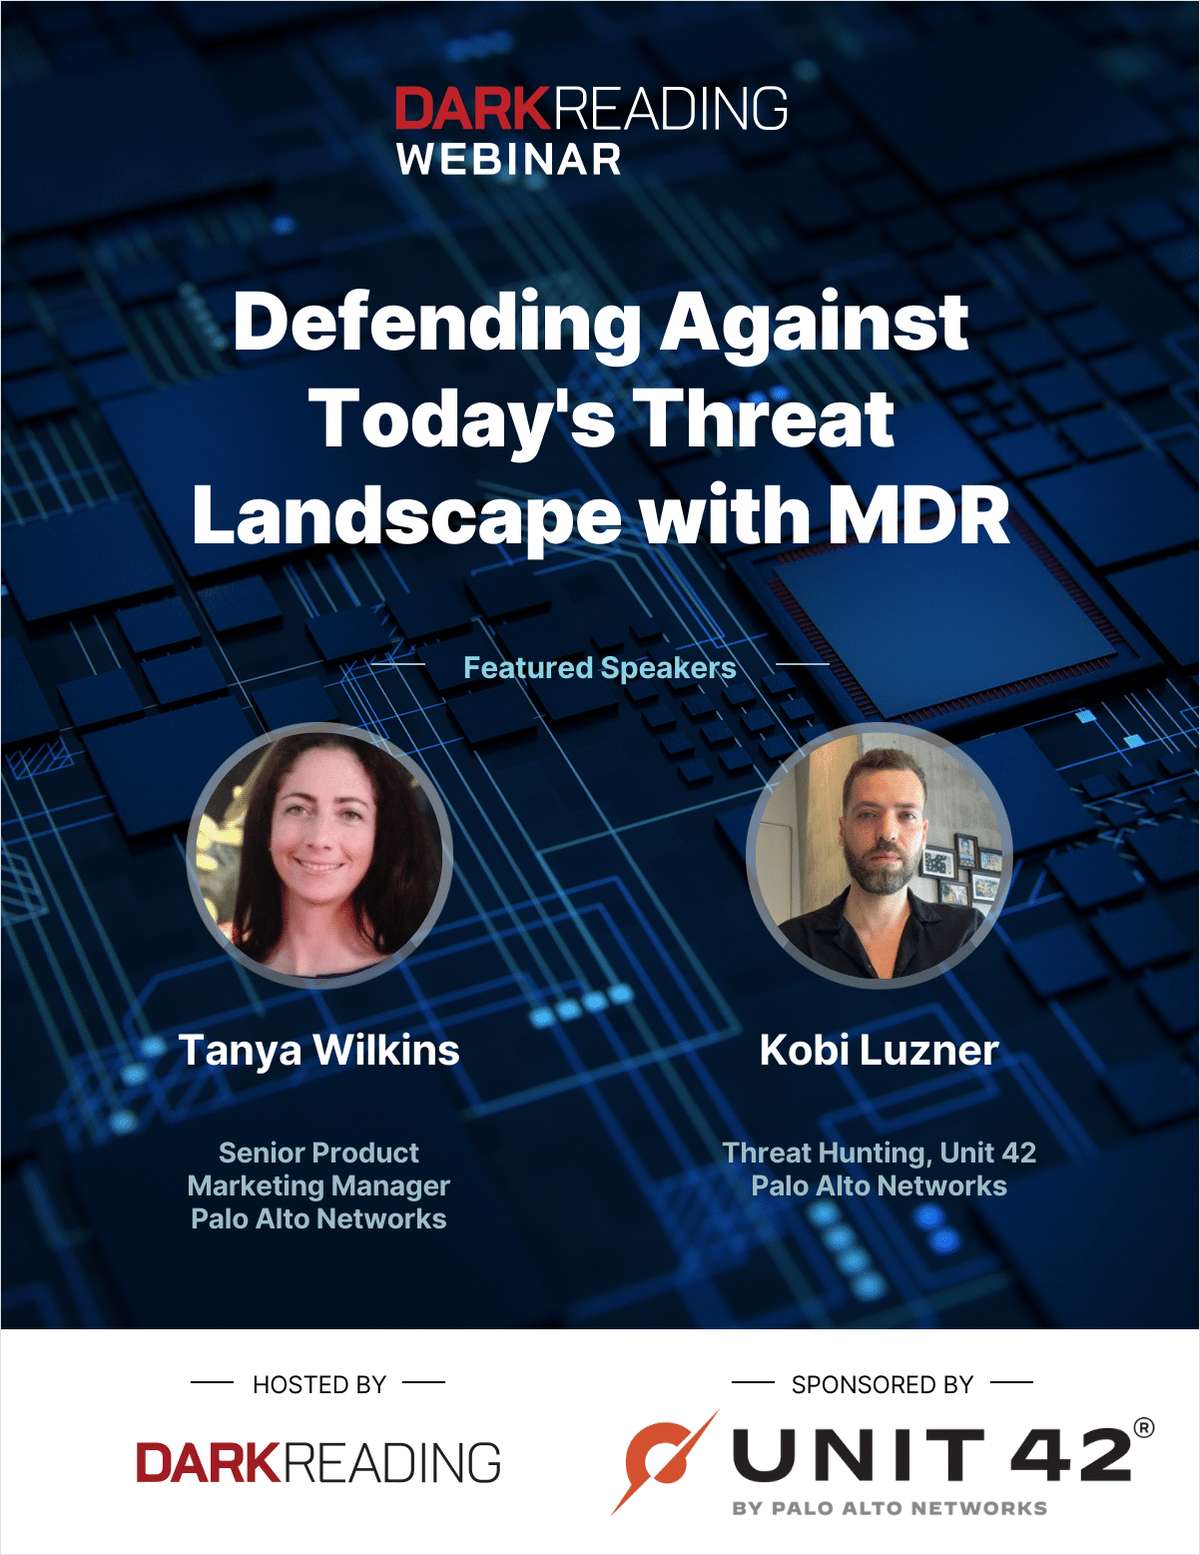 Defending Against Today's Threat Landscape with MDR